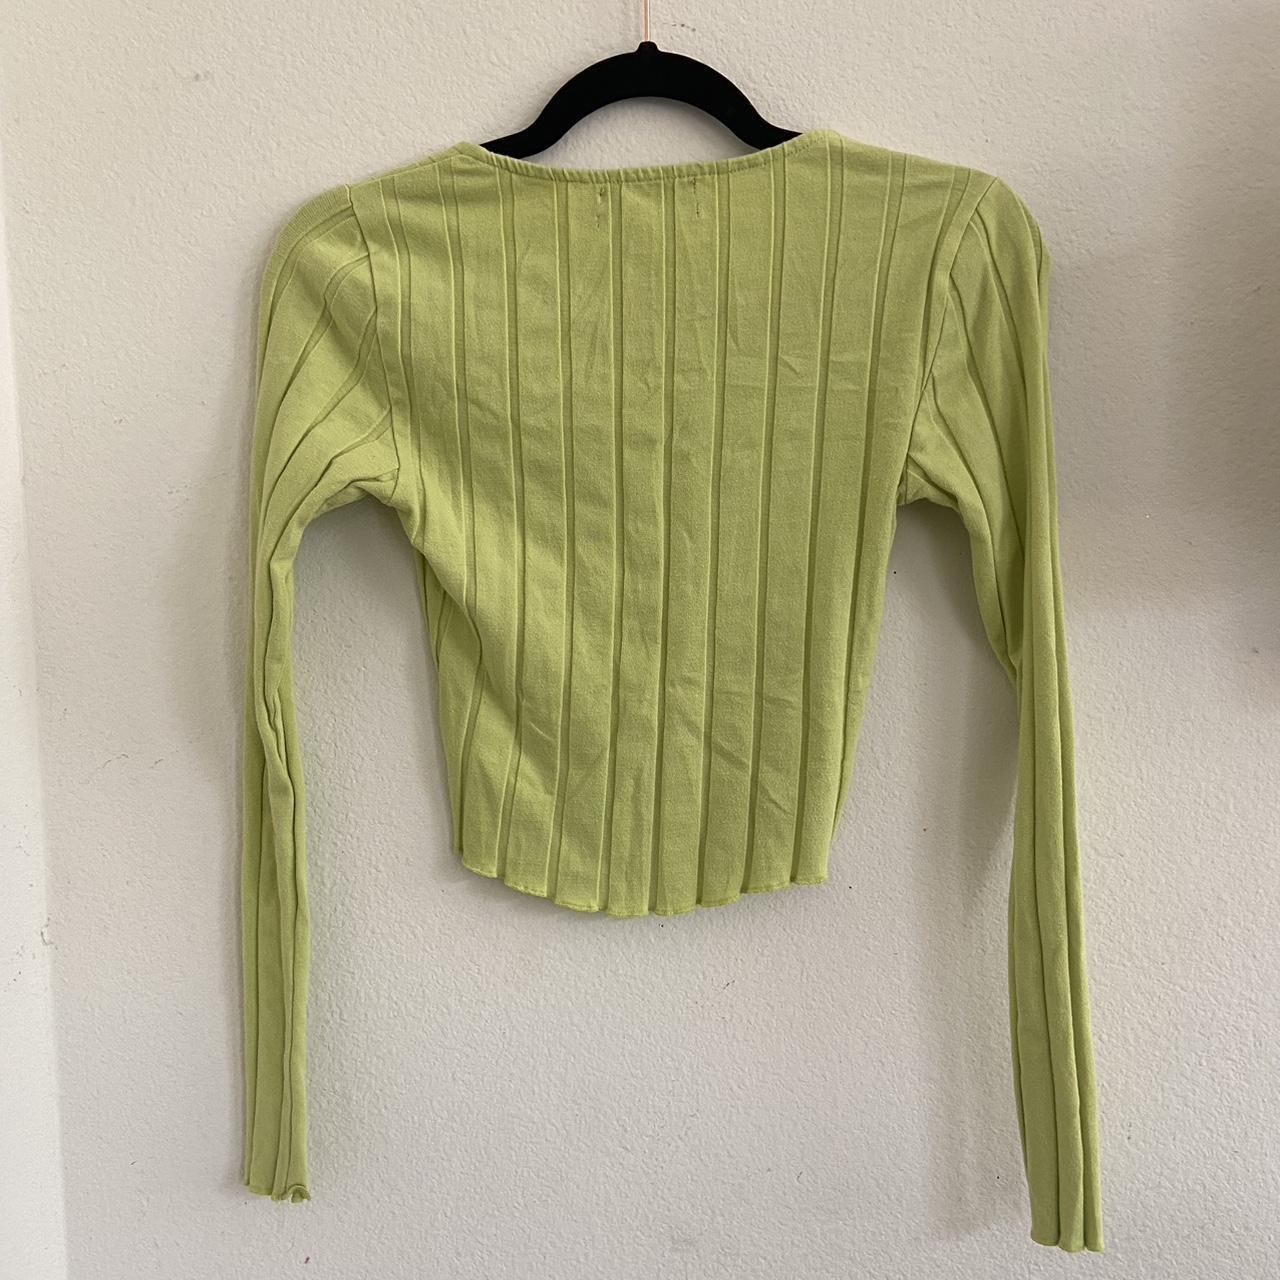 Urban outfitters lime square neck top !! free... - Depop